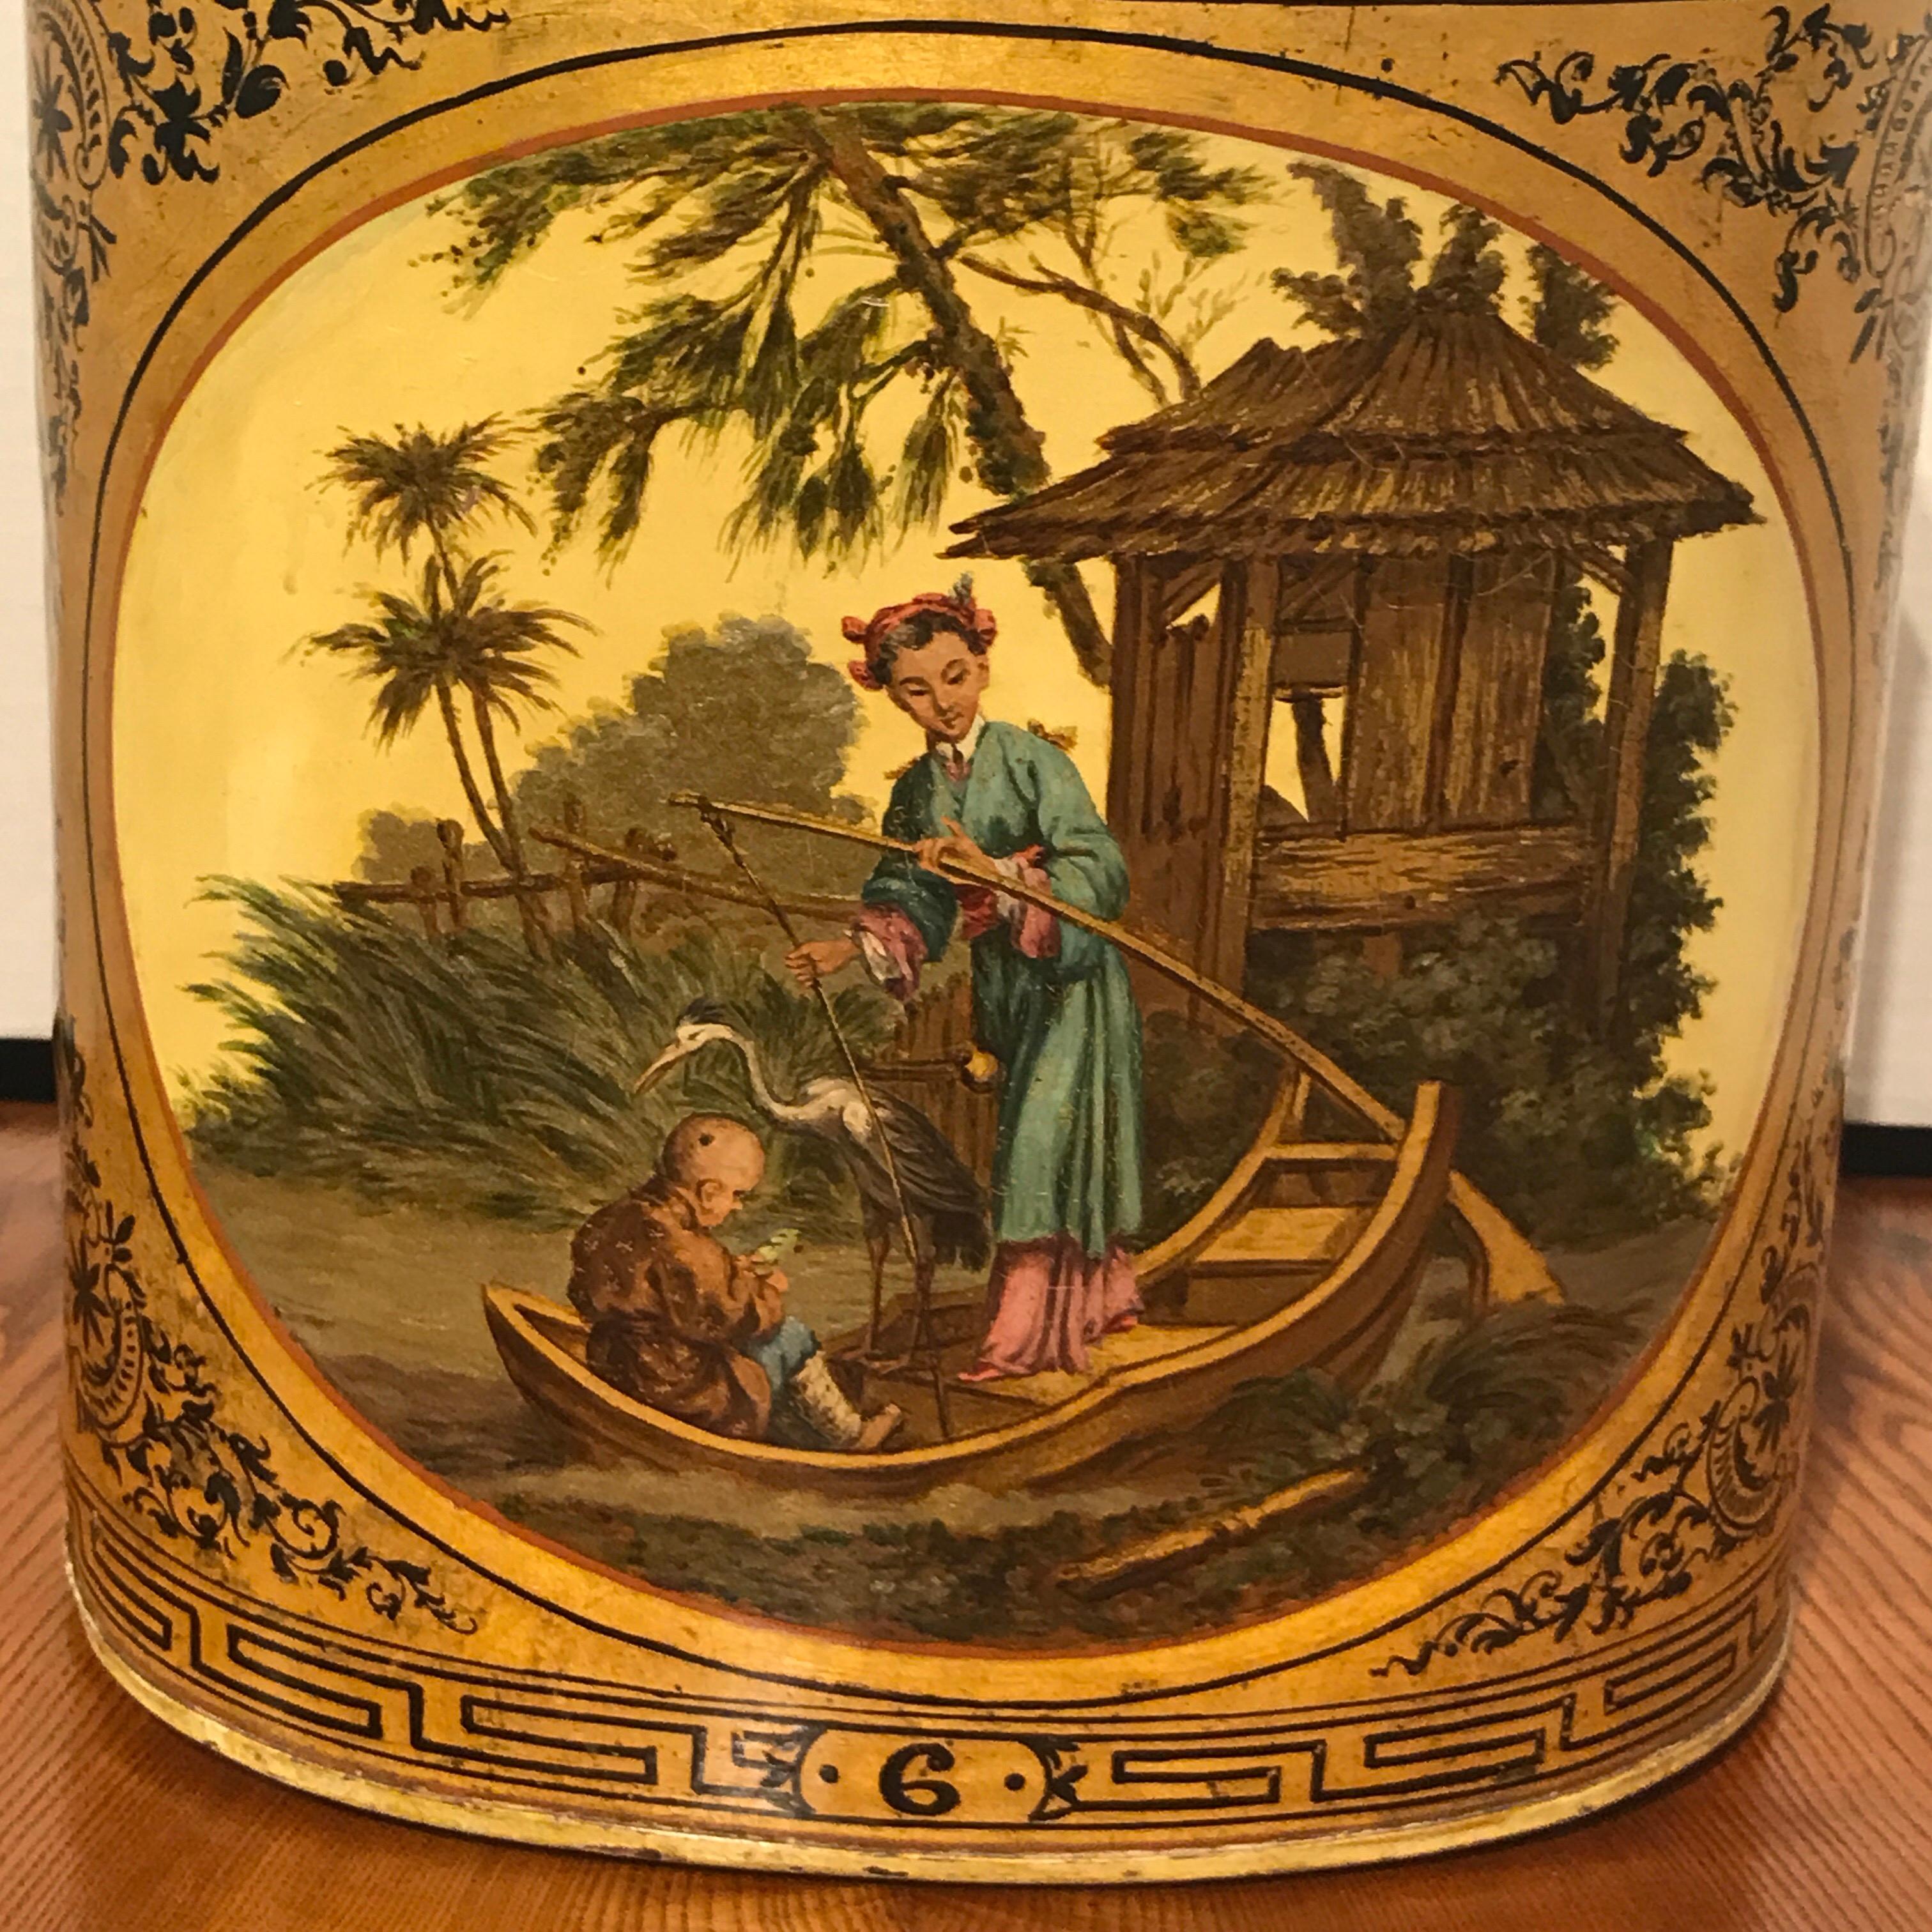 Antique English chinoiserie #6 tea caddy lamp, exquisitely painted garden scene with light yellow background. The Tea caddy alone measures 17